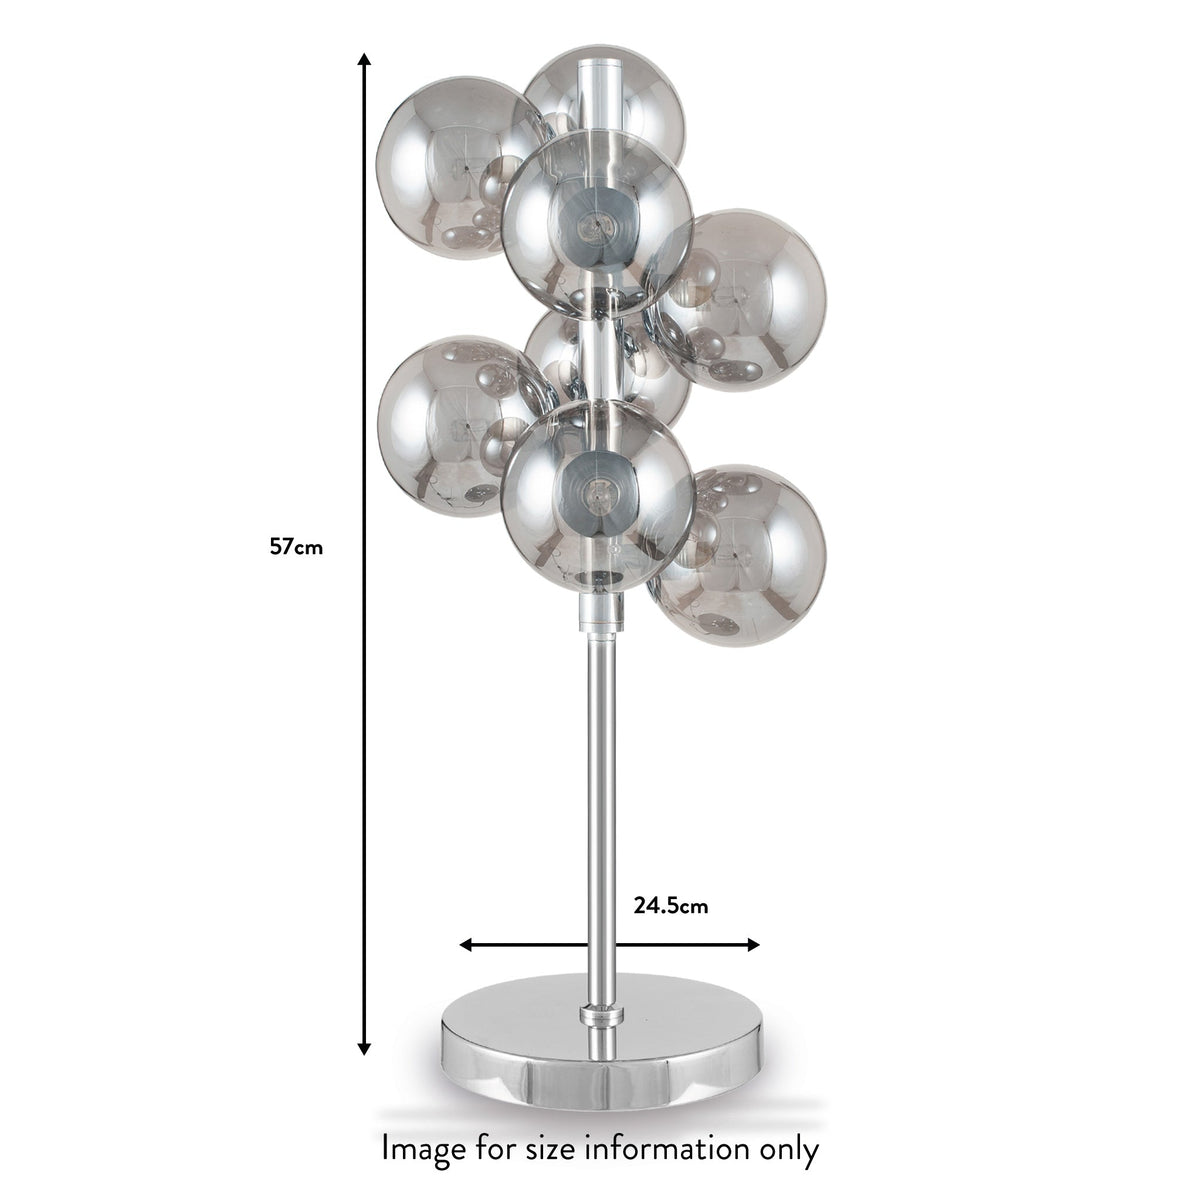 Vecchio Smoked Glass Orb and Chrome Table Lamp dimensions